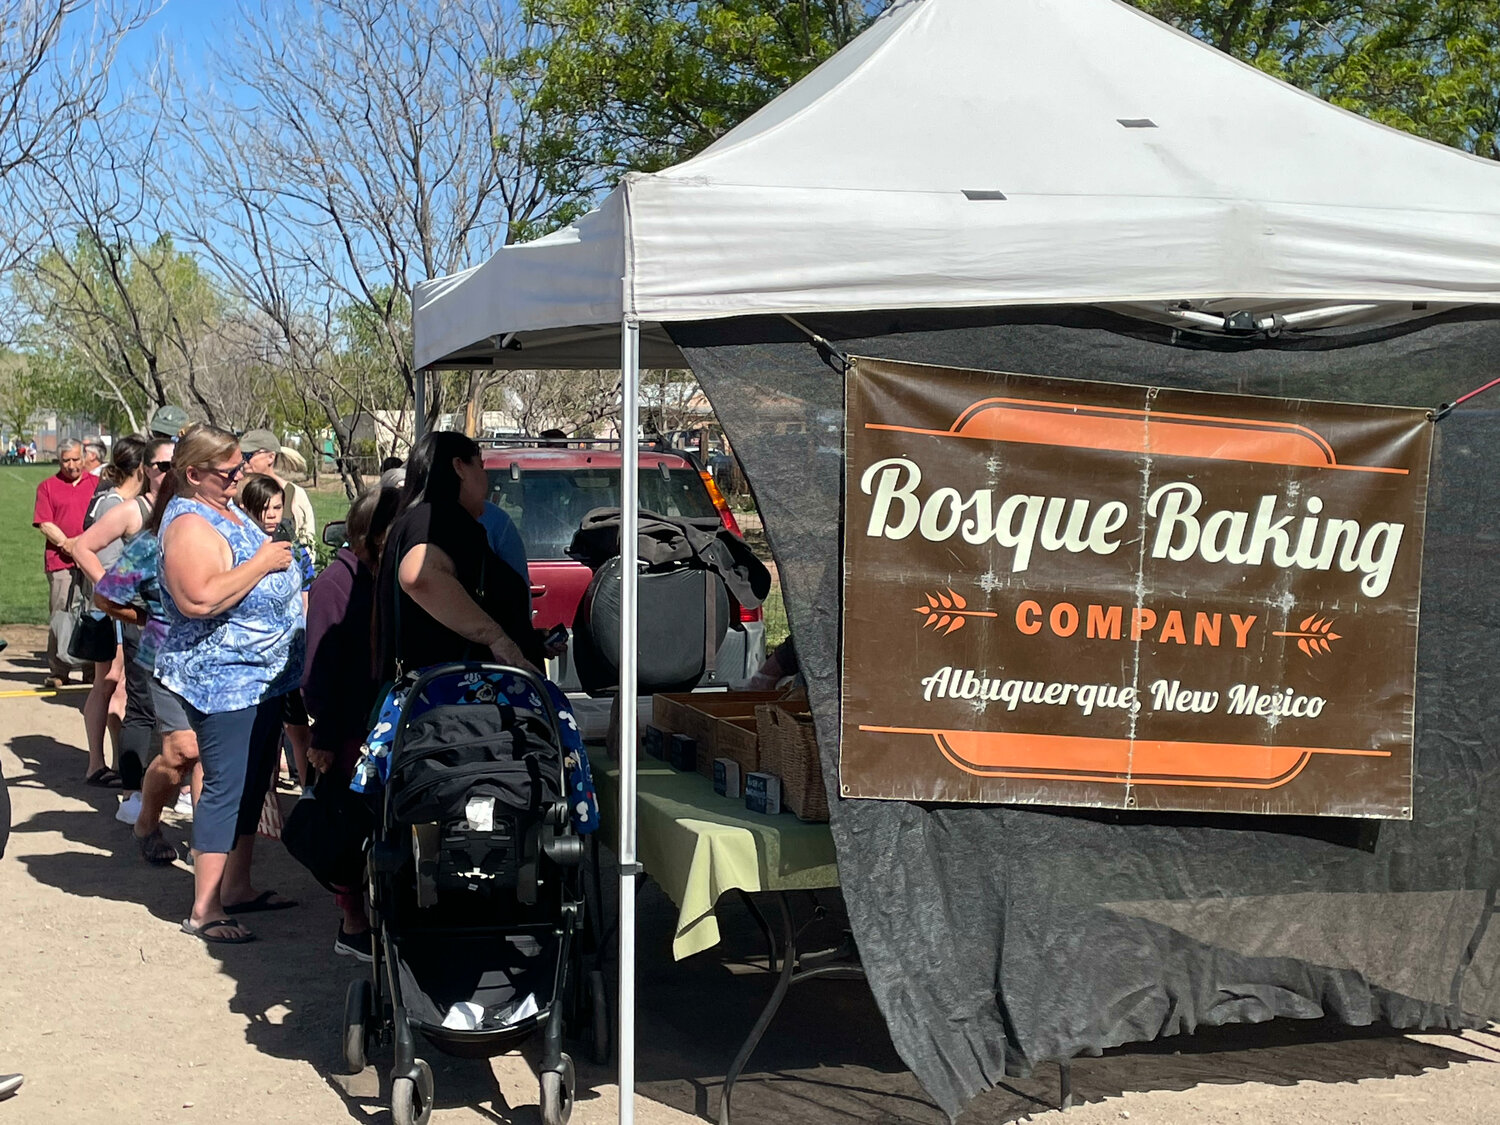 There was a line at Bosque Baking until they sold out about halfway through the market. (T.S. Last/Corrales Comment)